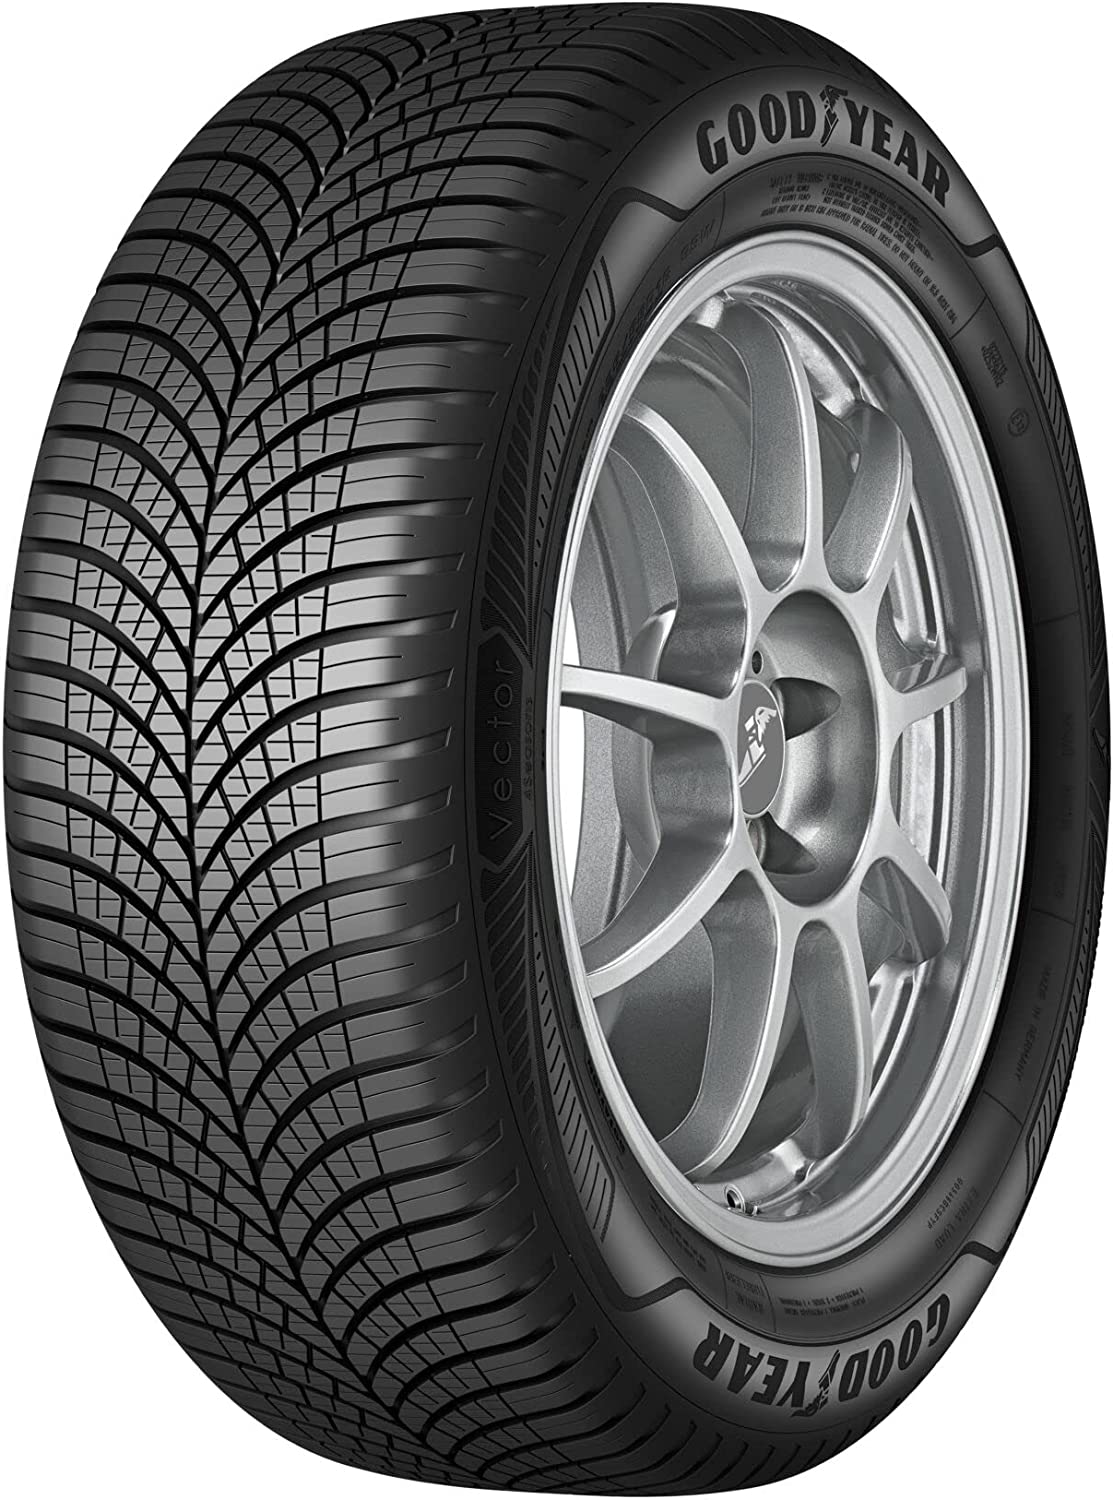 Gomme Nuove Goodyear 215/55 R16 97V VECTOR 4S G3 XL M+S pneumatici nuovi All Season